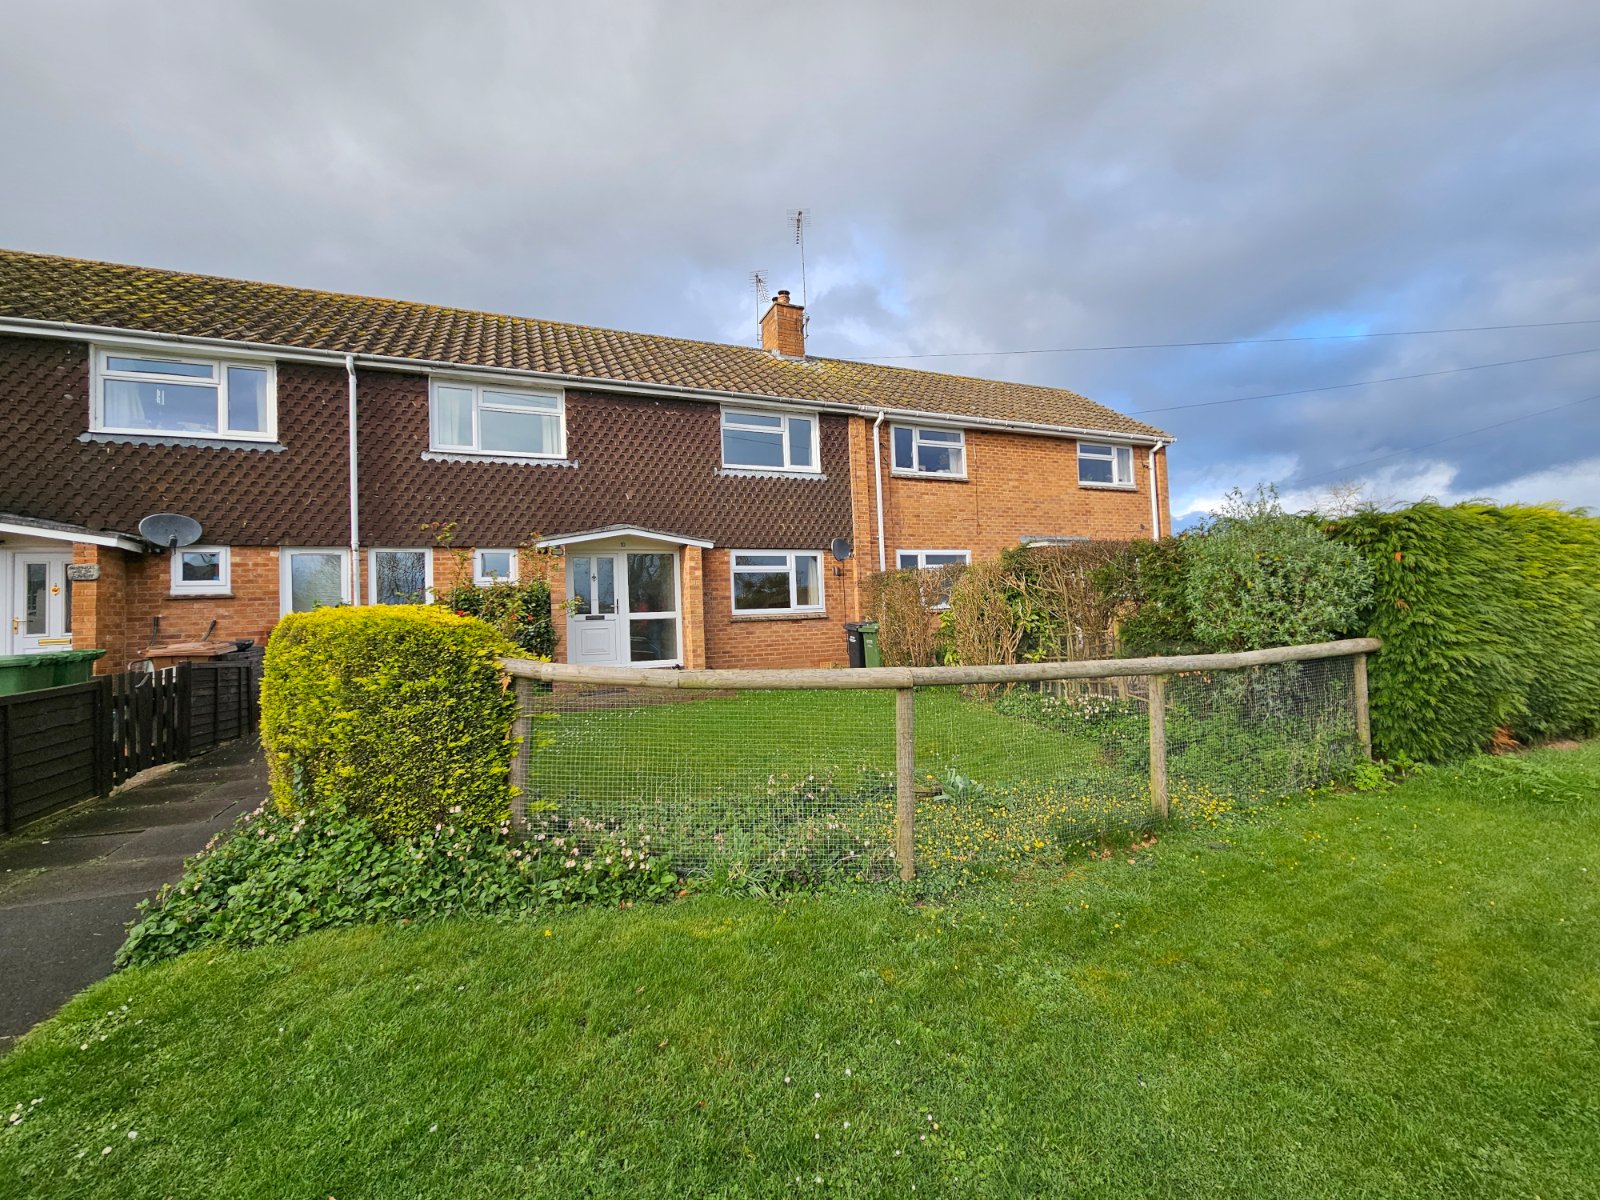 St. Peters Close, Pirton, Worcester, Worcestershire, WR8